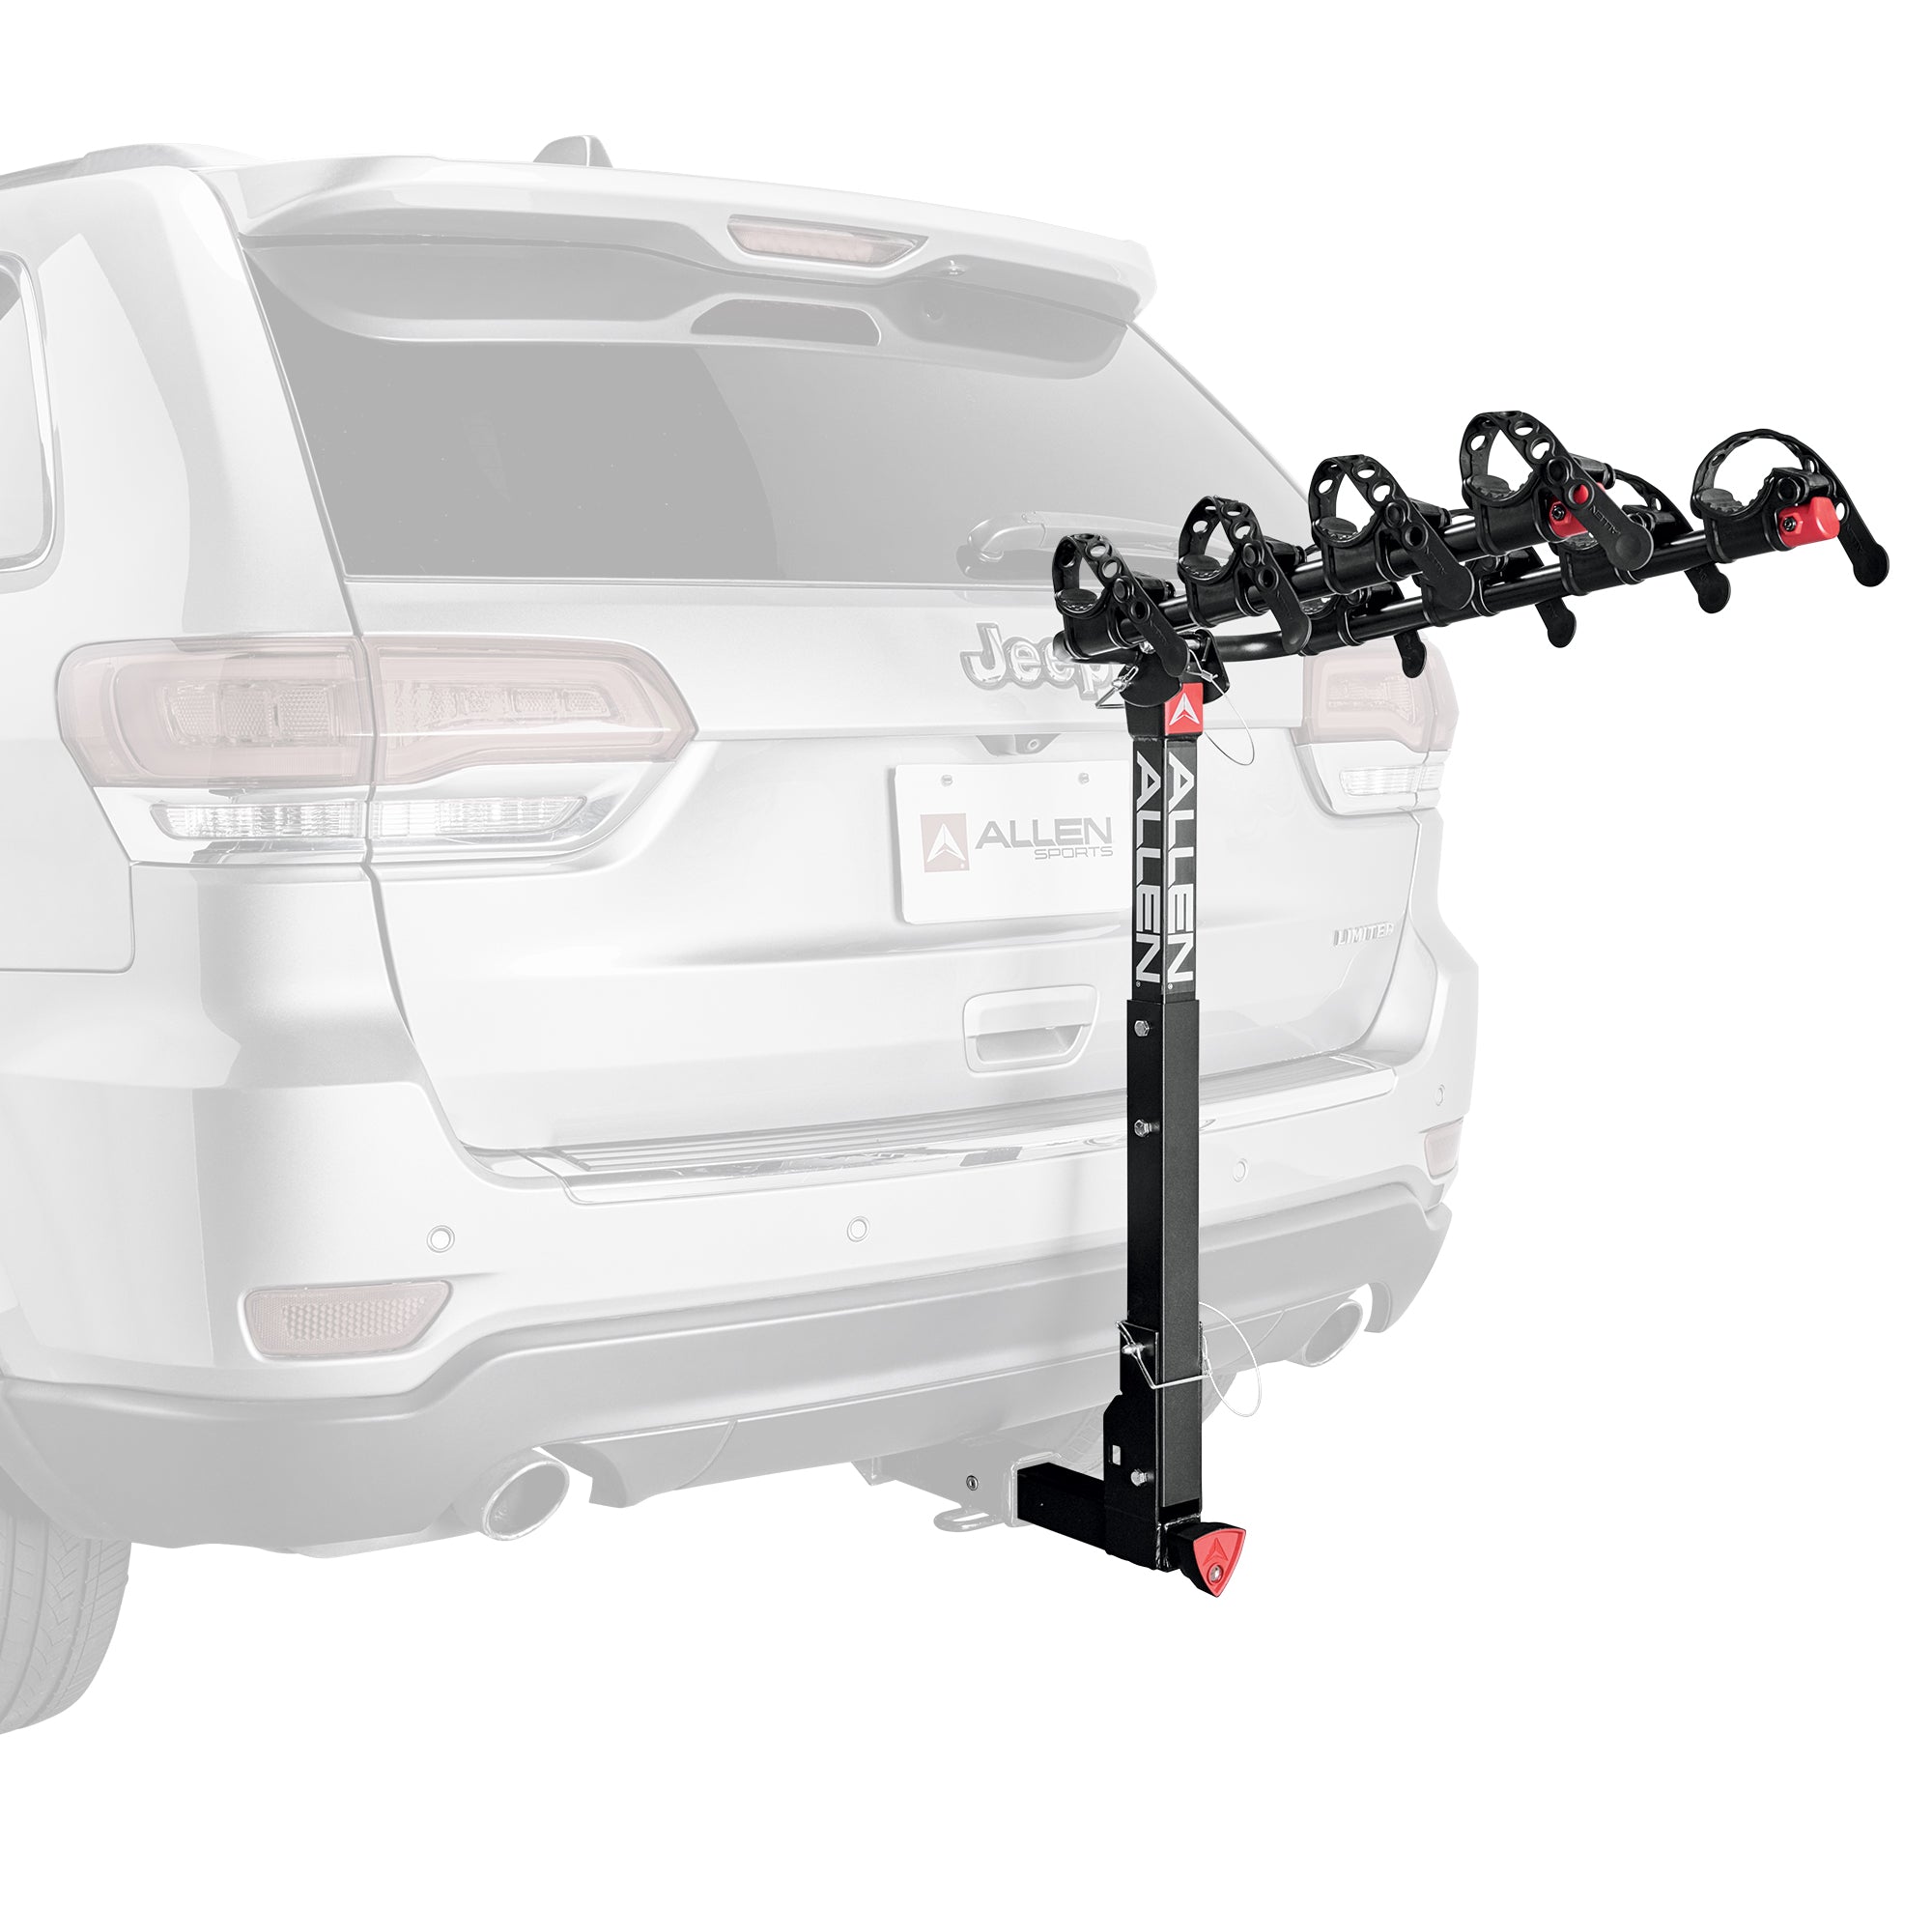 4 Bike Deluxe Hitch Racks 2" Receiver Locking Folding Tilting Carry Arms-Car & Truck Racks-AULEY